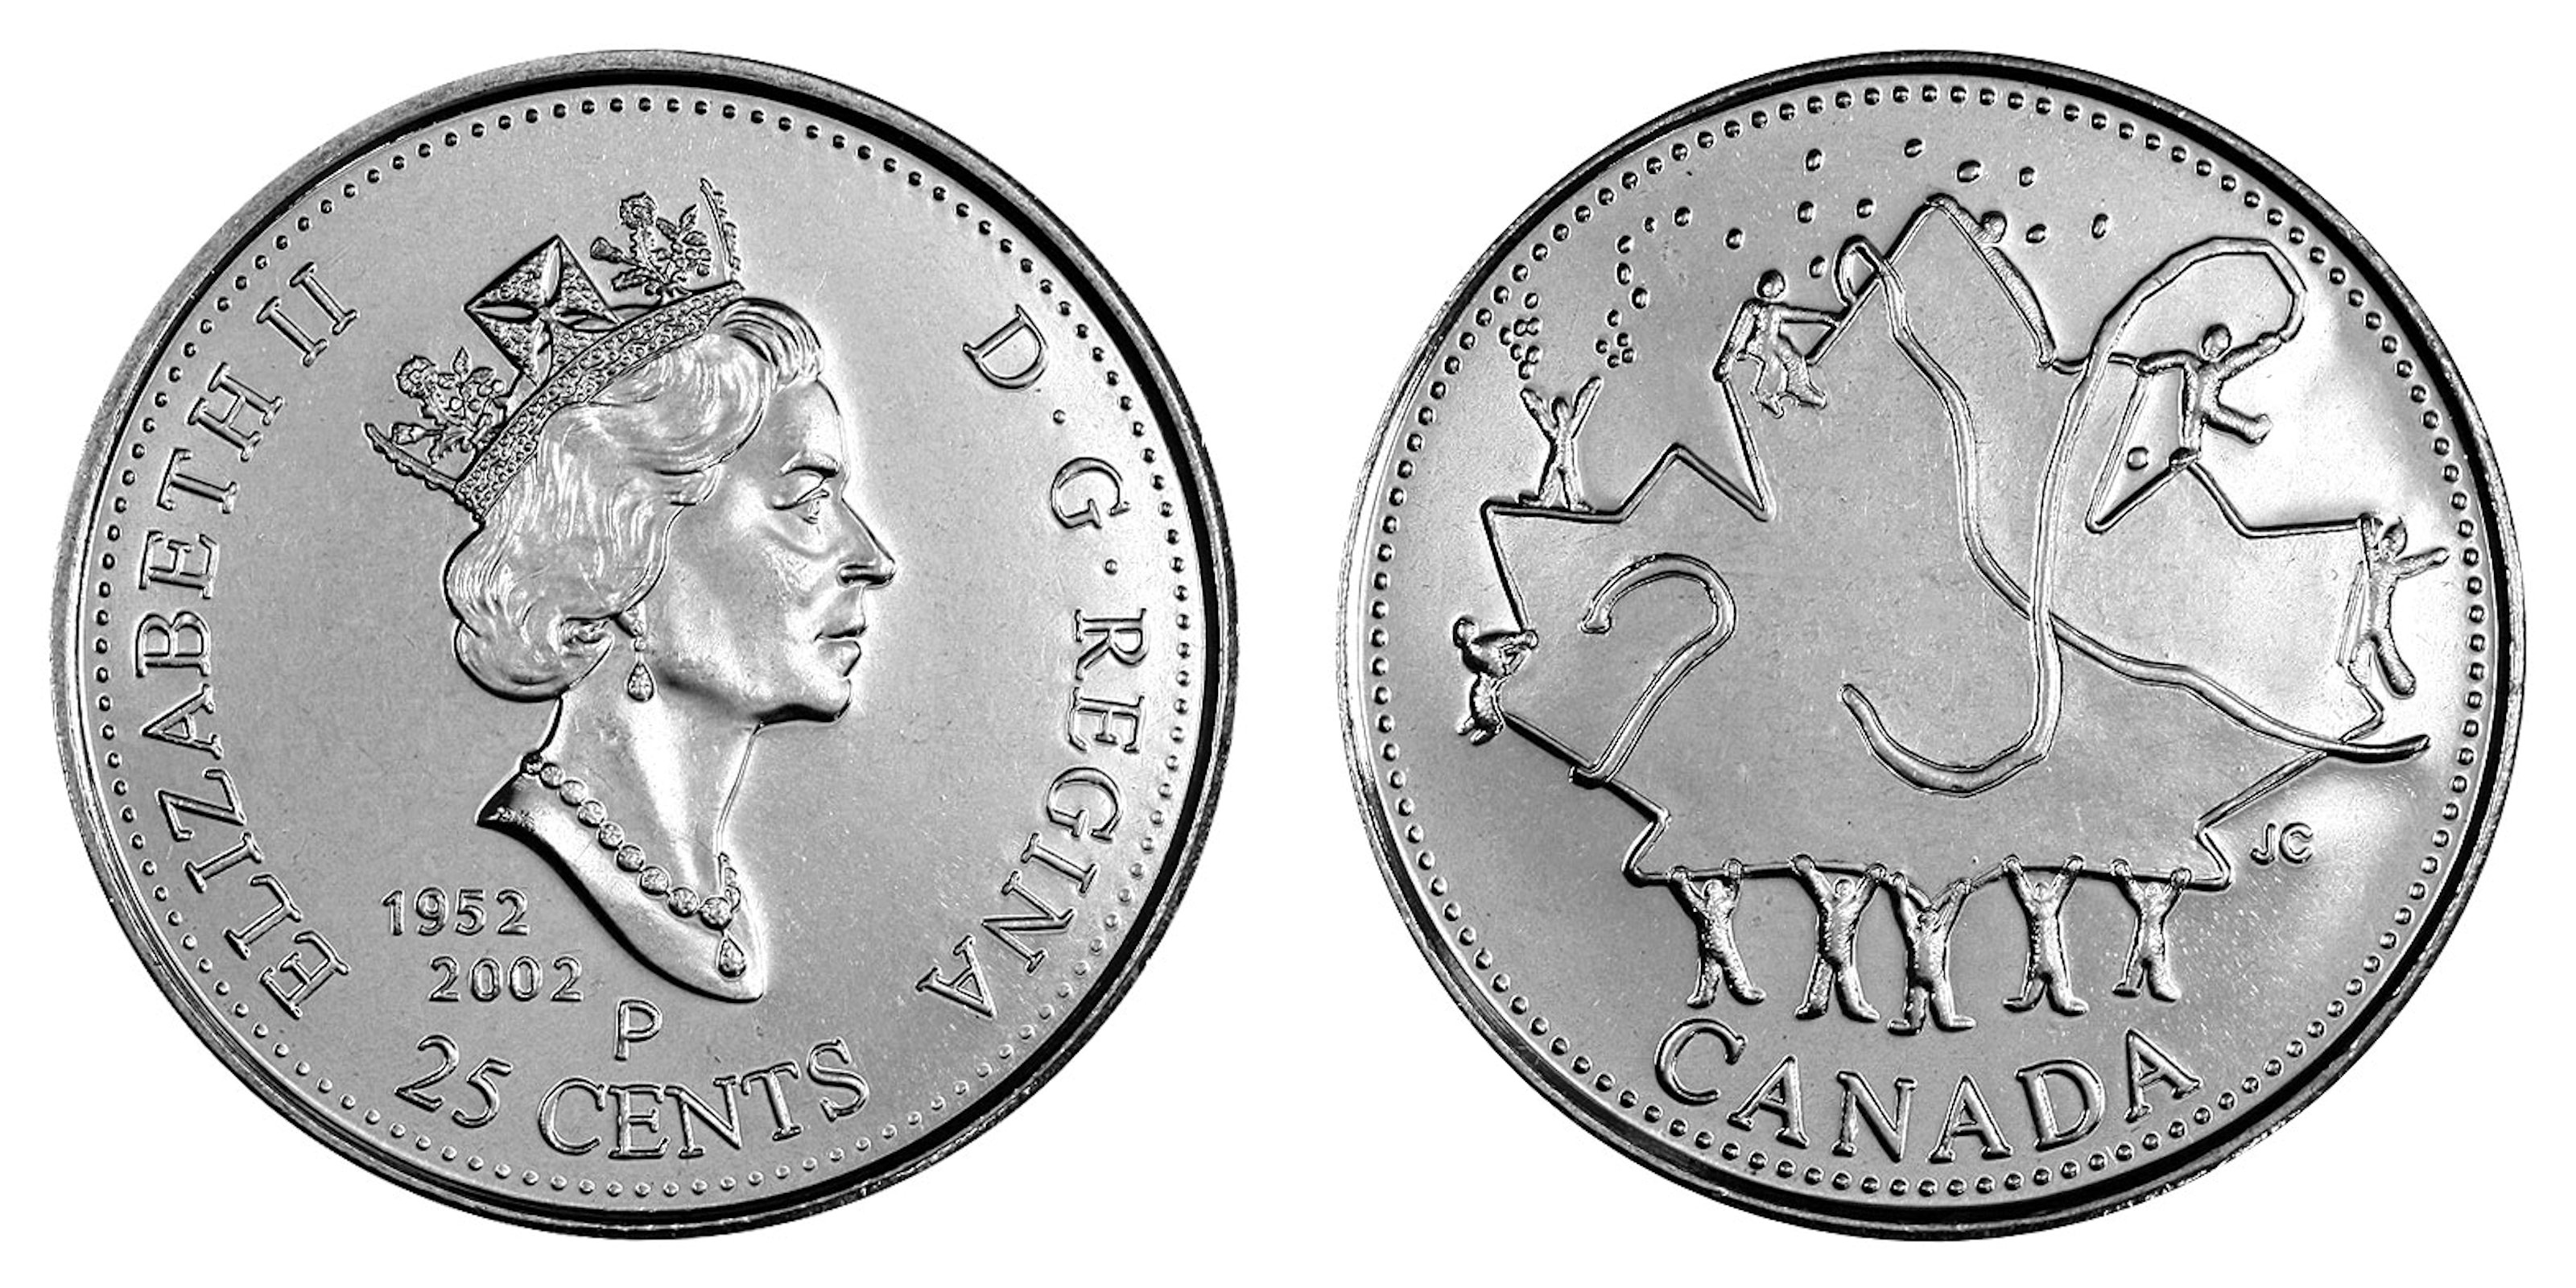 Canadian 25 Cent Canada Day Coins